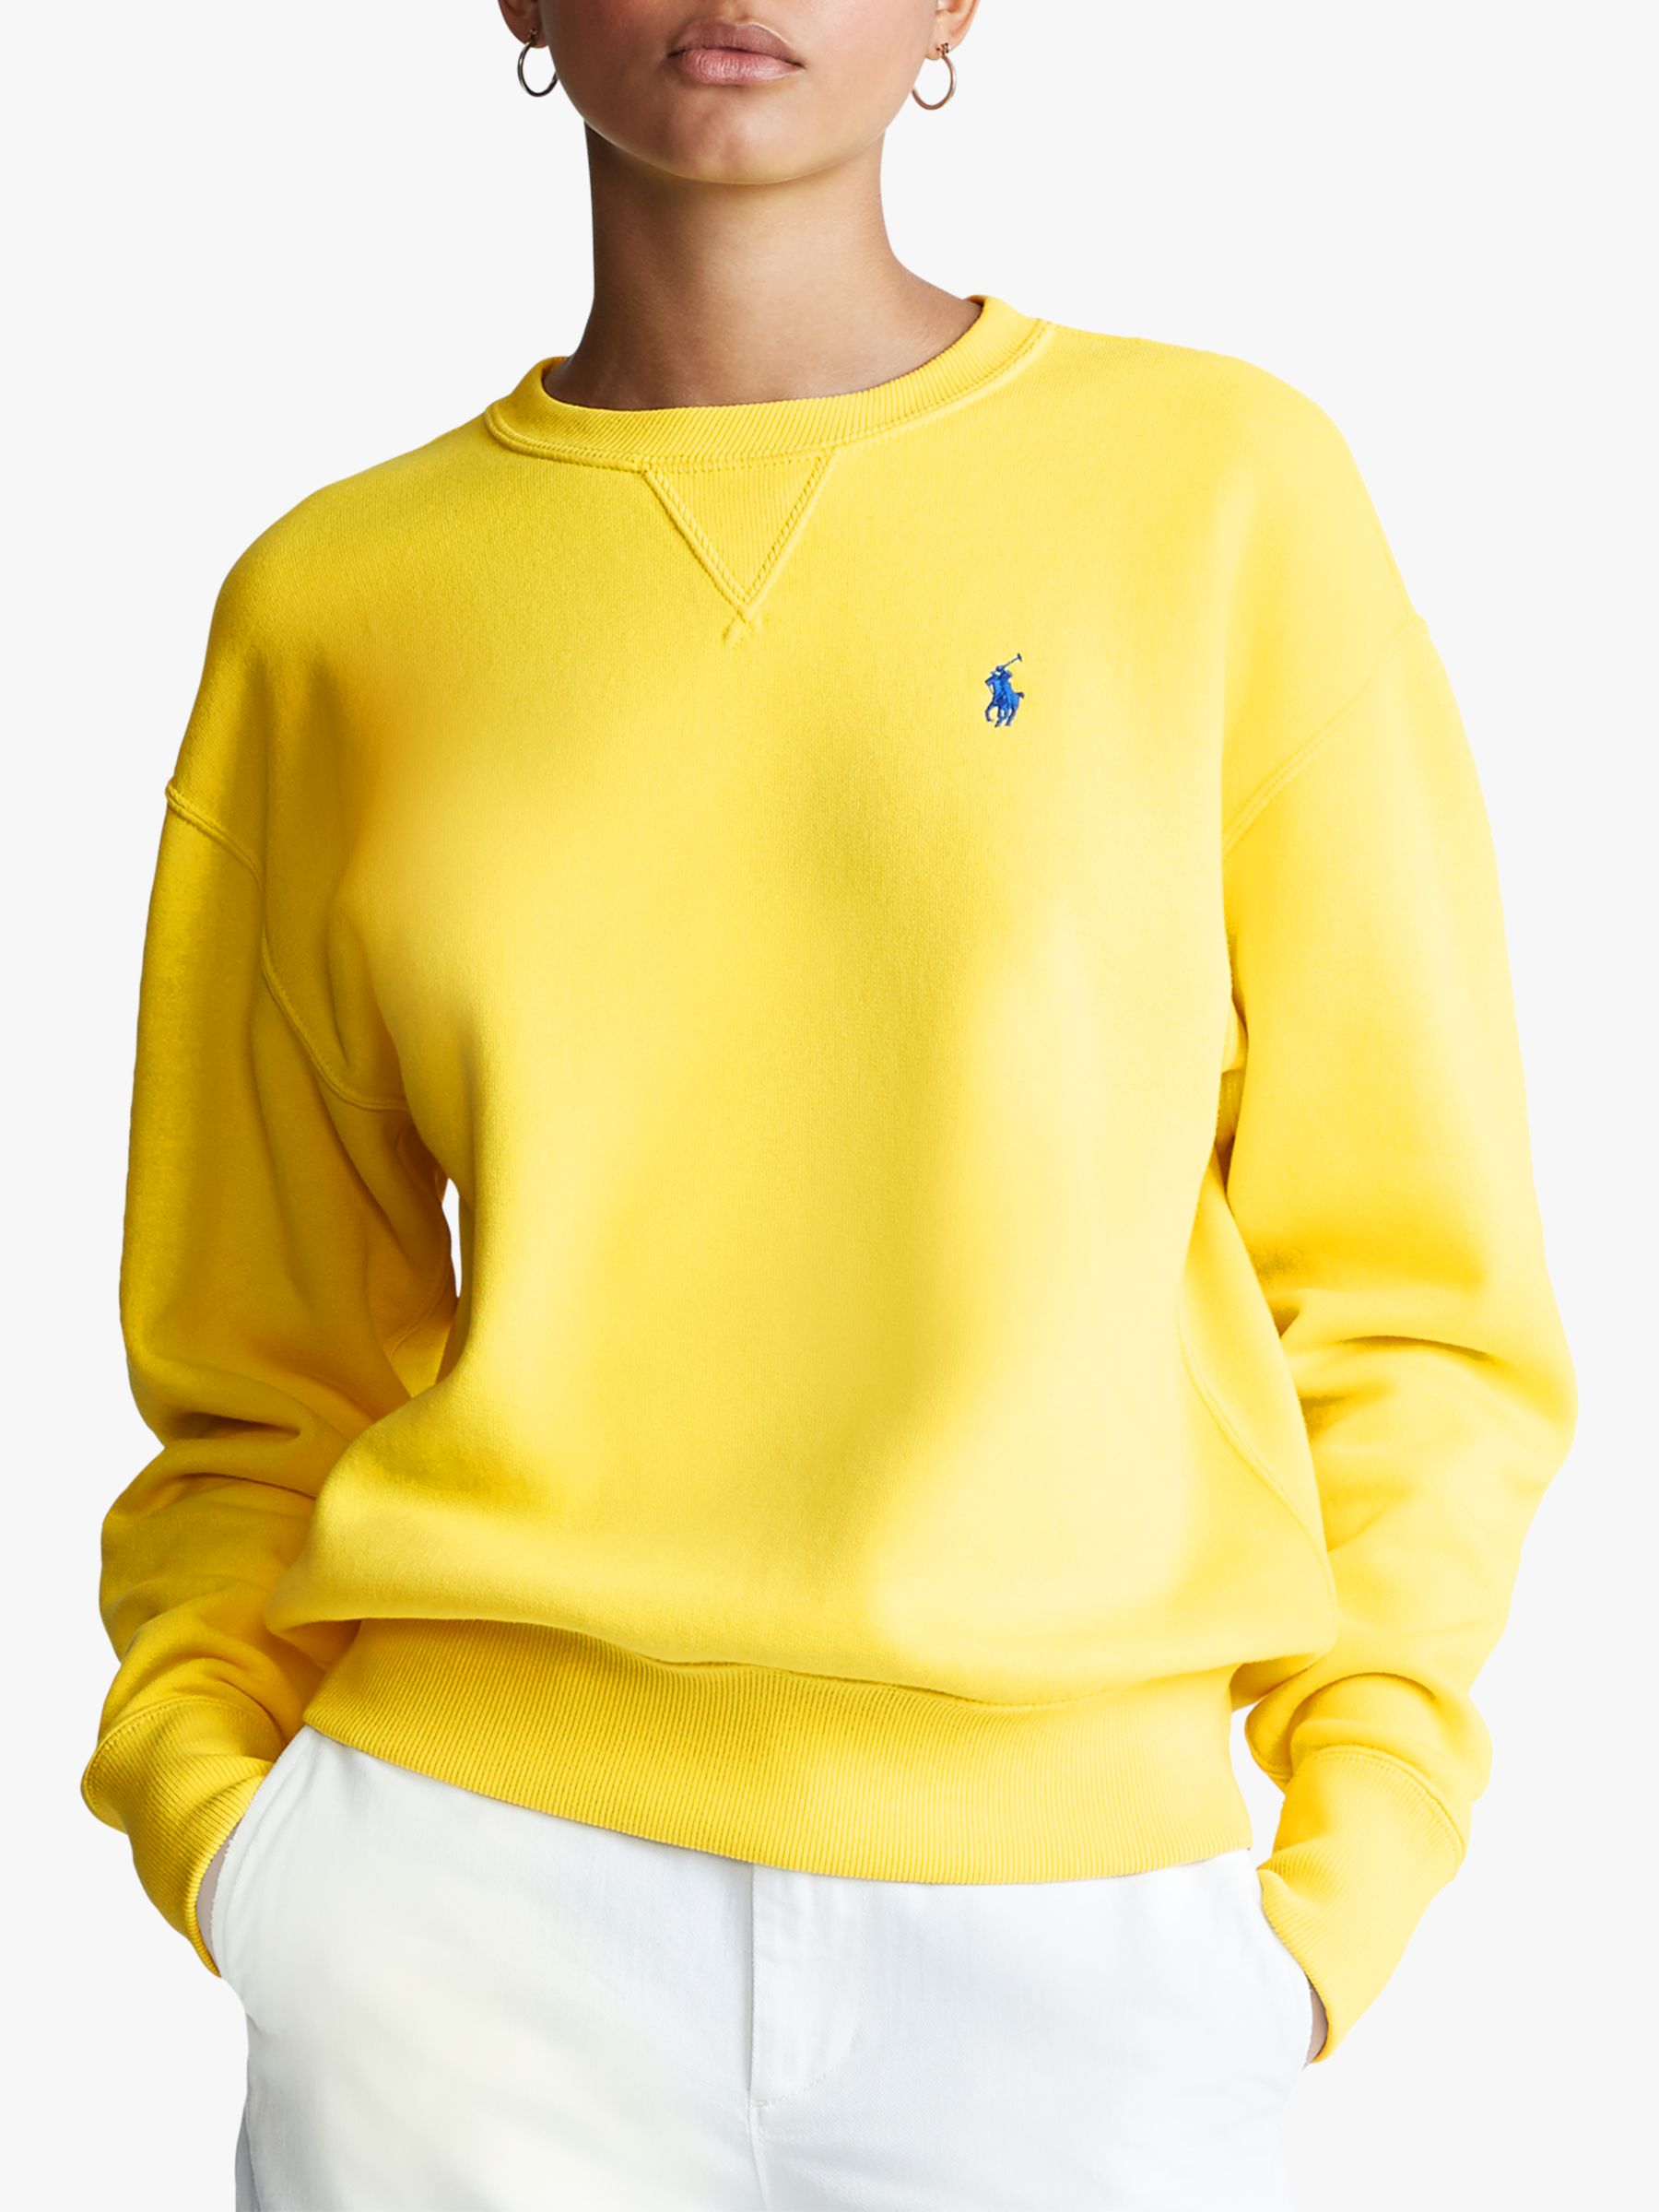 polo sweater zip up womens